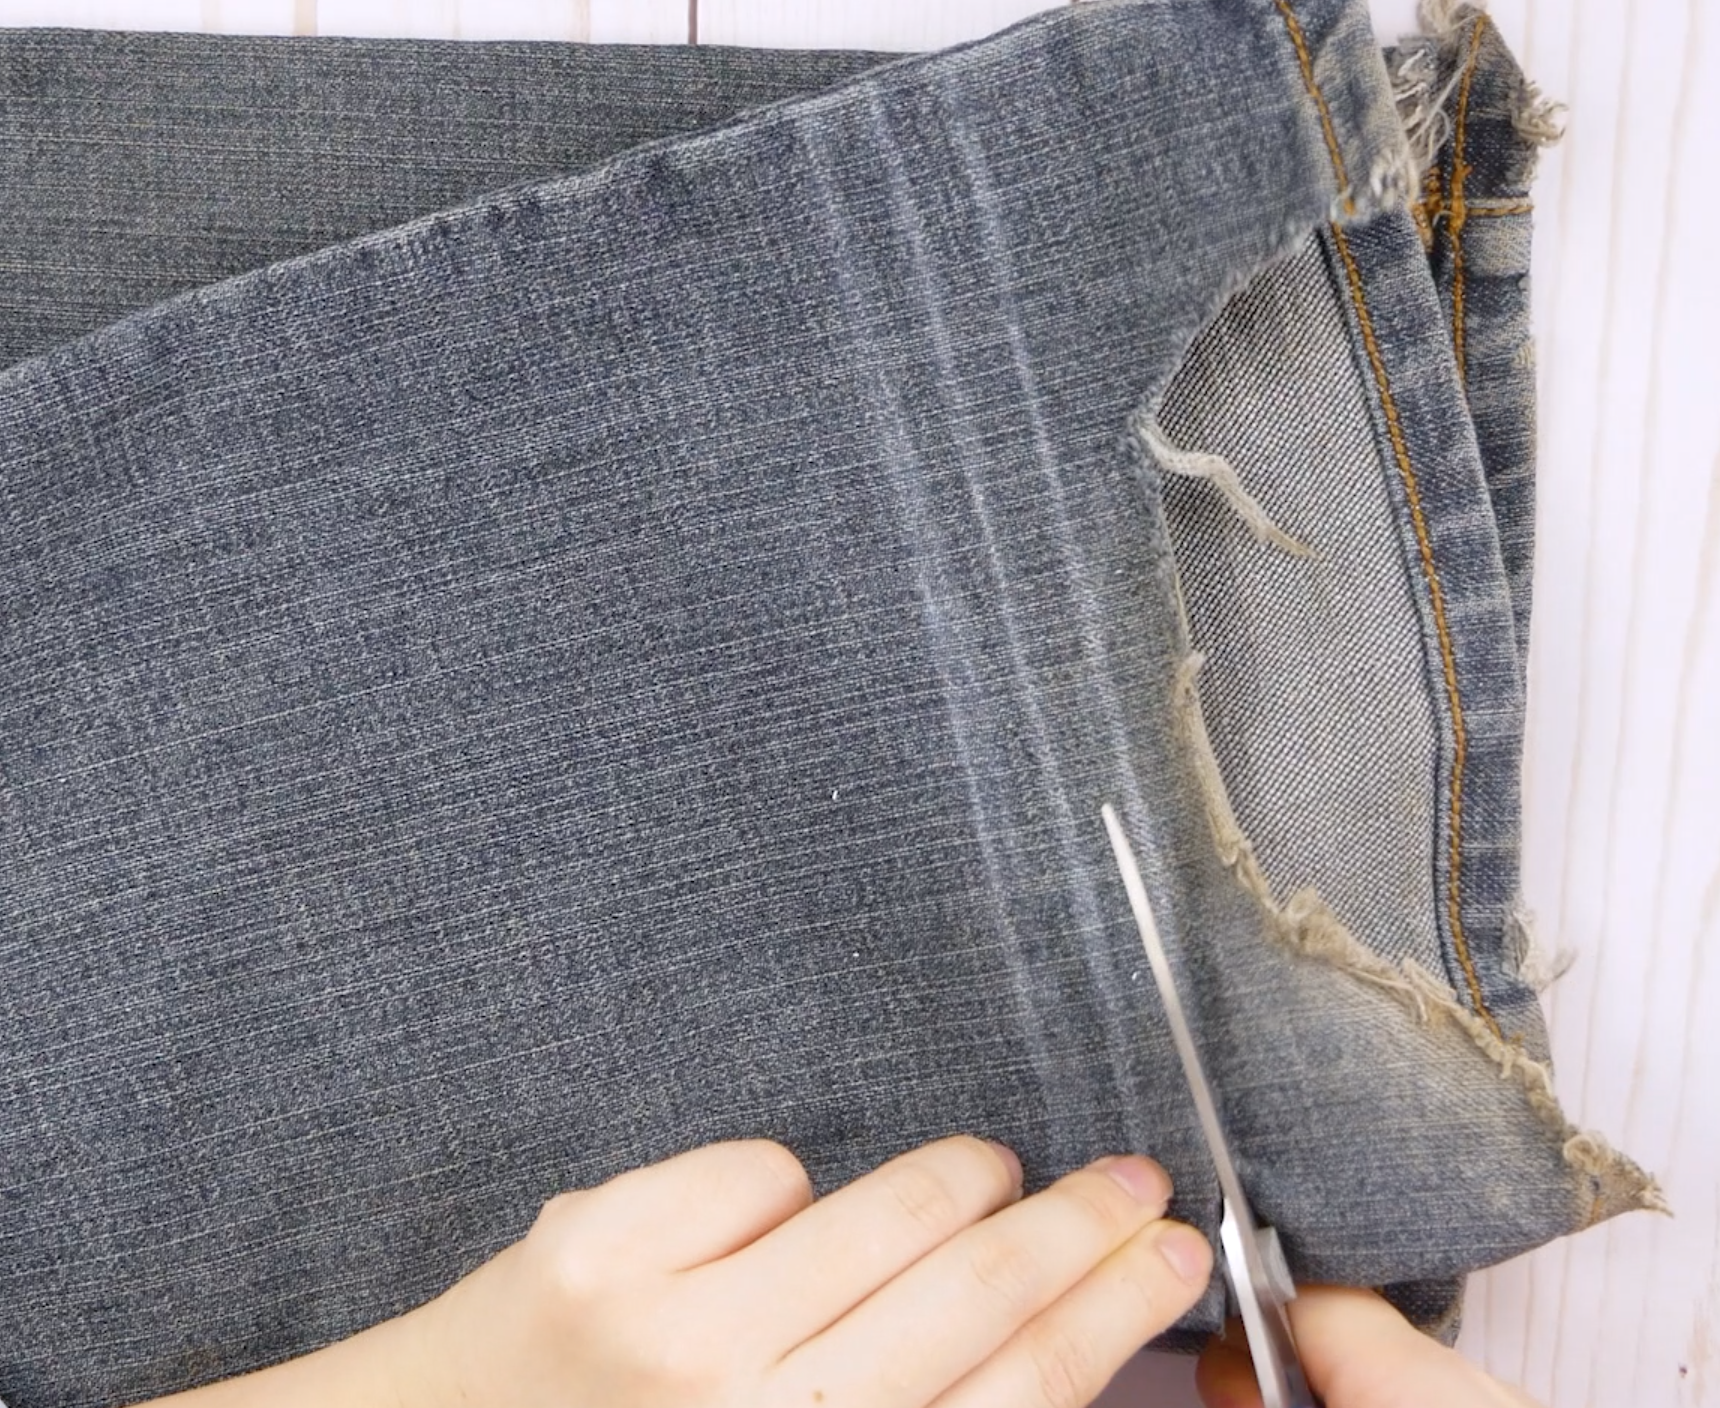 Sewing threads for denim and jeans